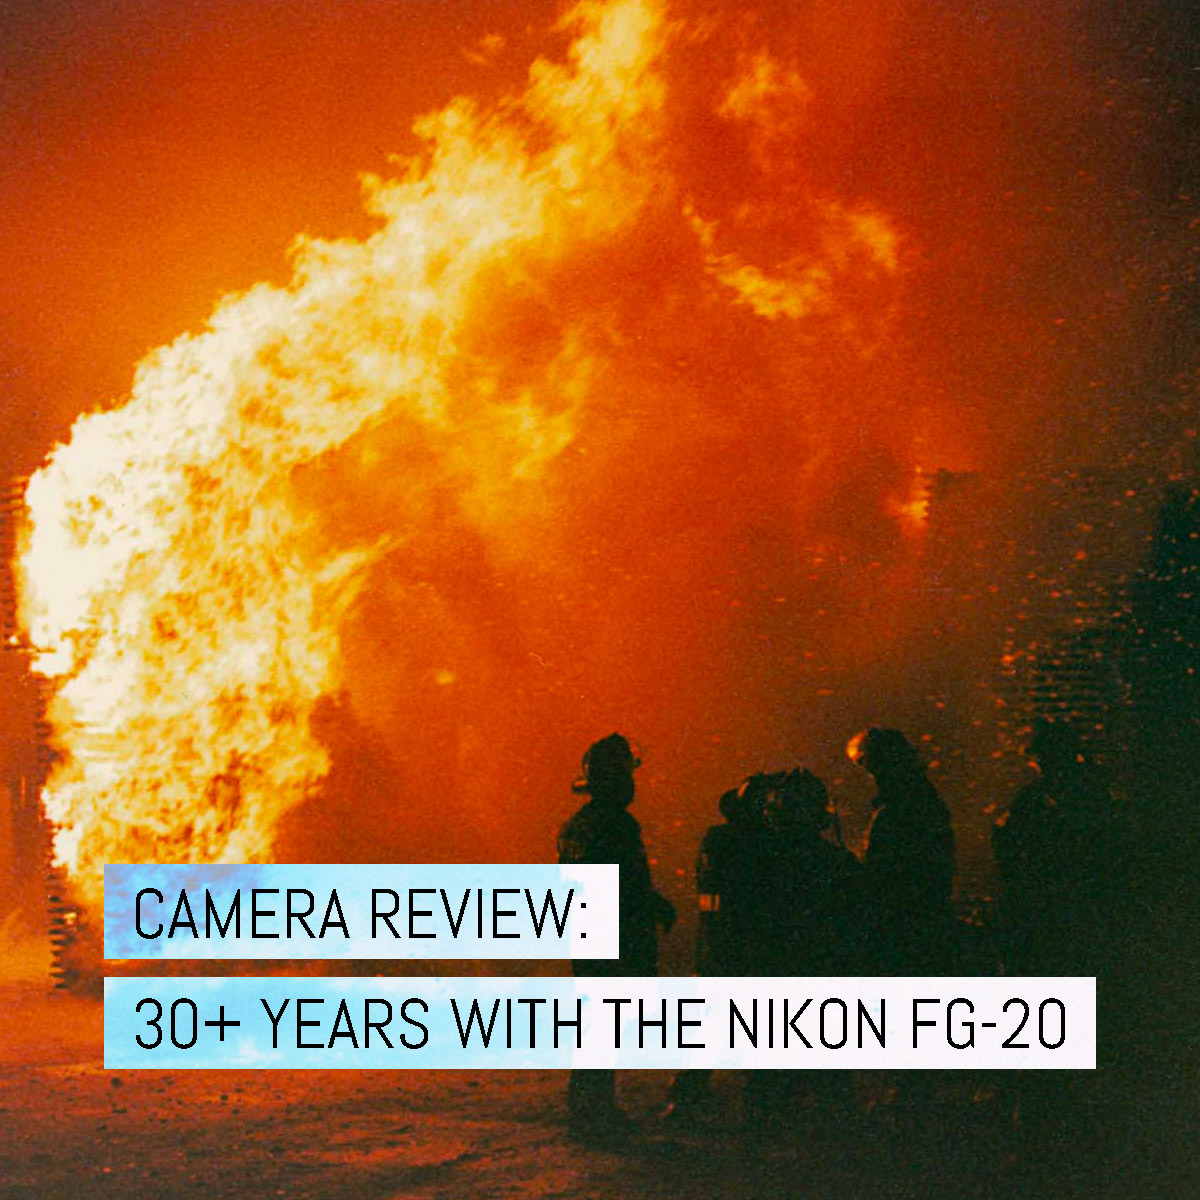 Camera review: 30+ years with the Nikon FG-20